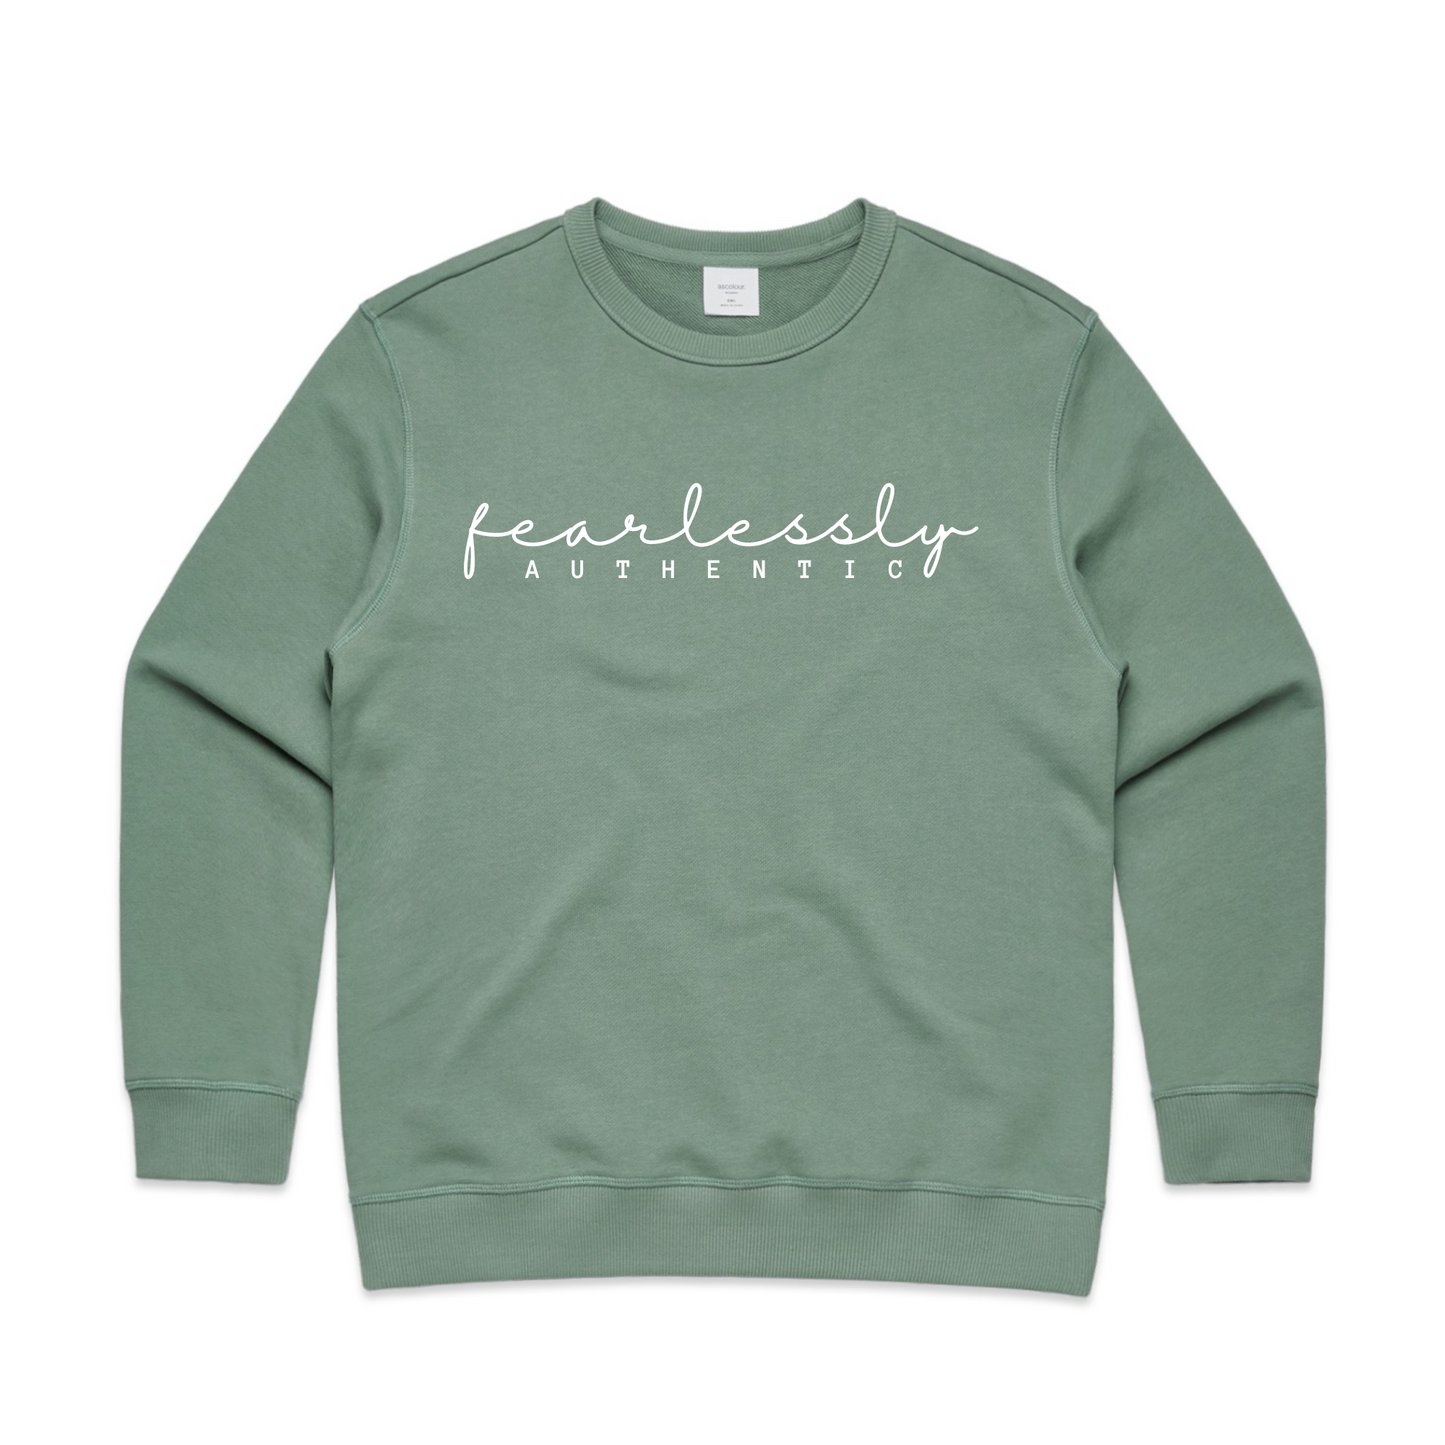 Fearlessly Authentic in white text on a sage green crew neck jumper